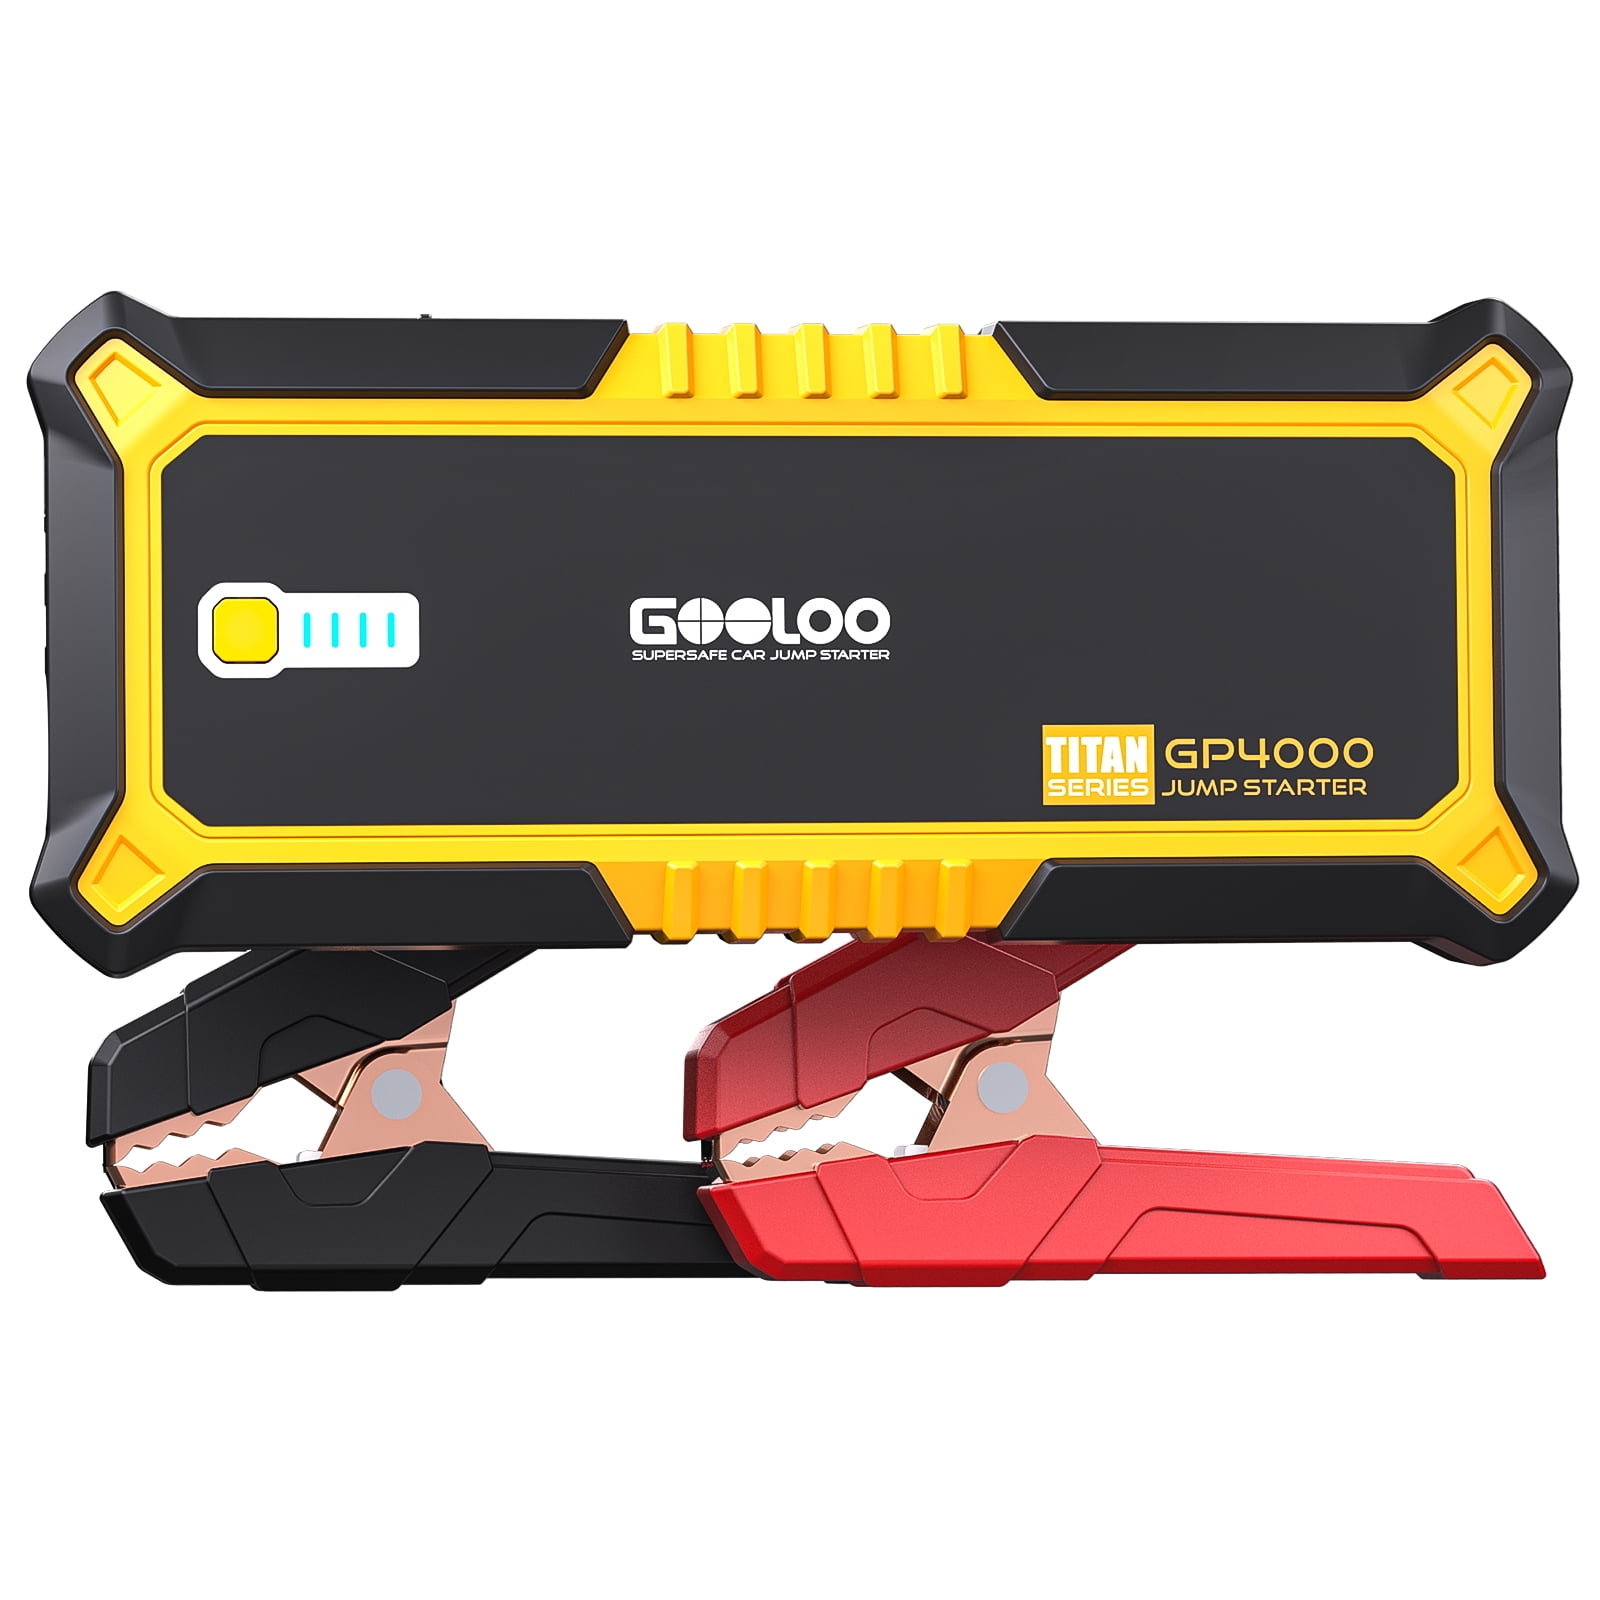 Gooloo GP4000 4000A Peak Jump Starter 26800mAh Auto Battery Pack, Supersafe Car Jumper, All Gas Up to 10.0L Diesel Engine, Yellow